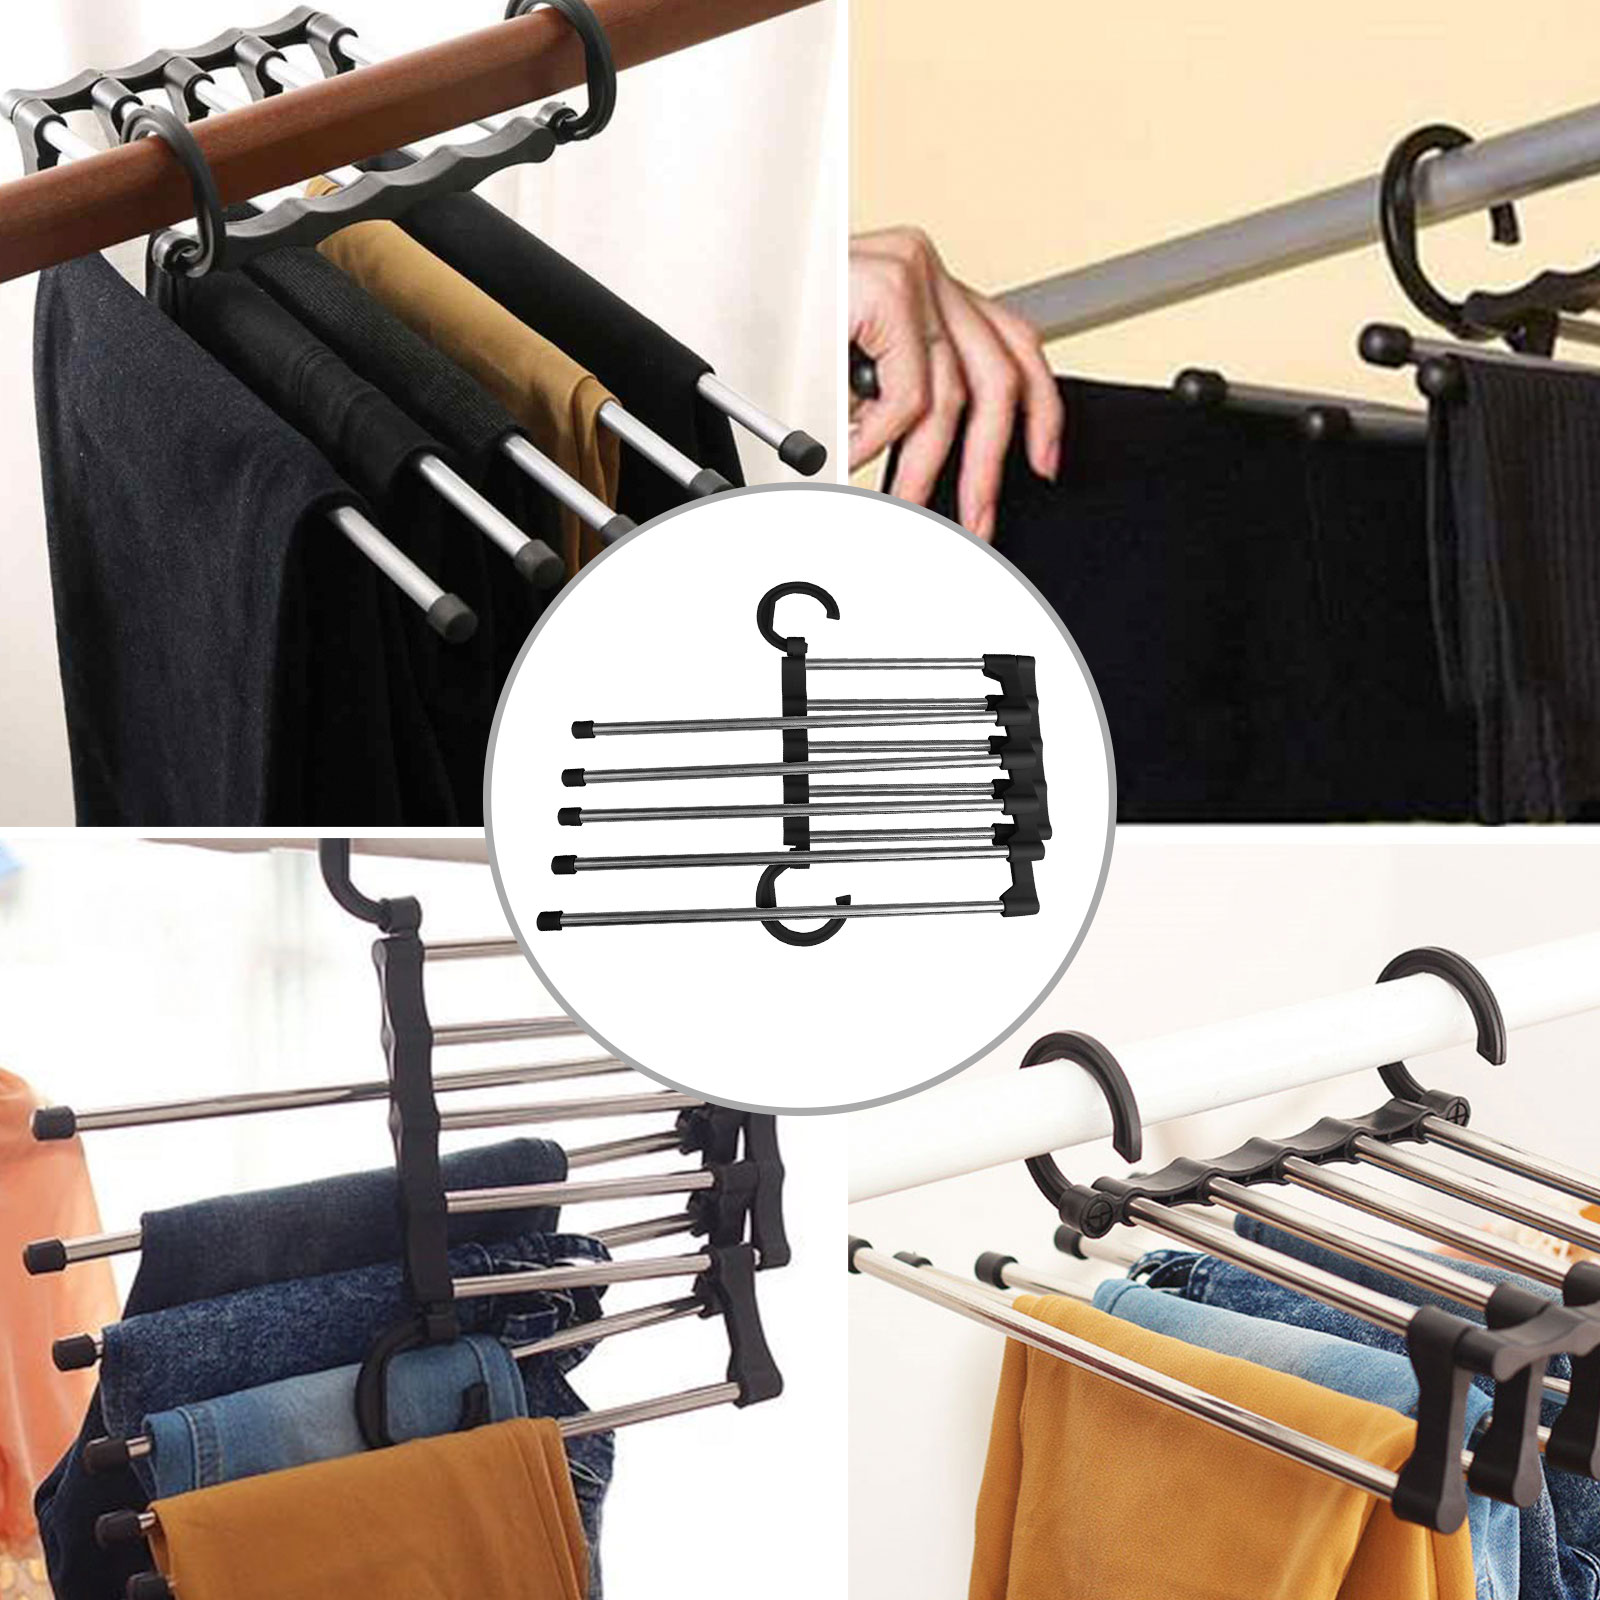 Xinqi Star 5PCS Pants Hangers Trouser Hangers S-type 5 layers Stainless Steel Trousers Rack Space Saving Storage Rack Space Saving,Multi-function Jeans Holder